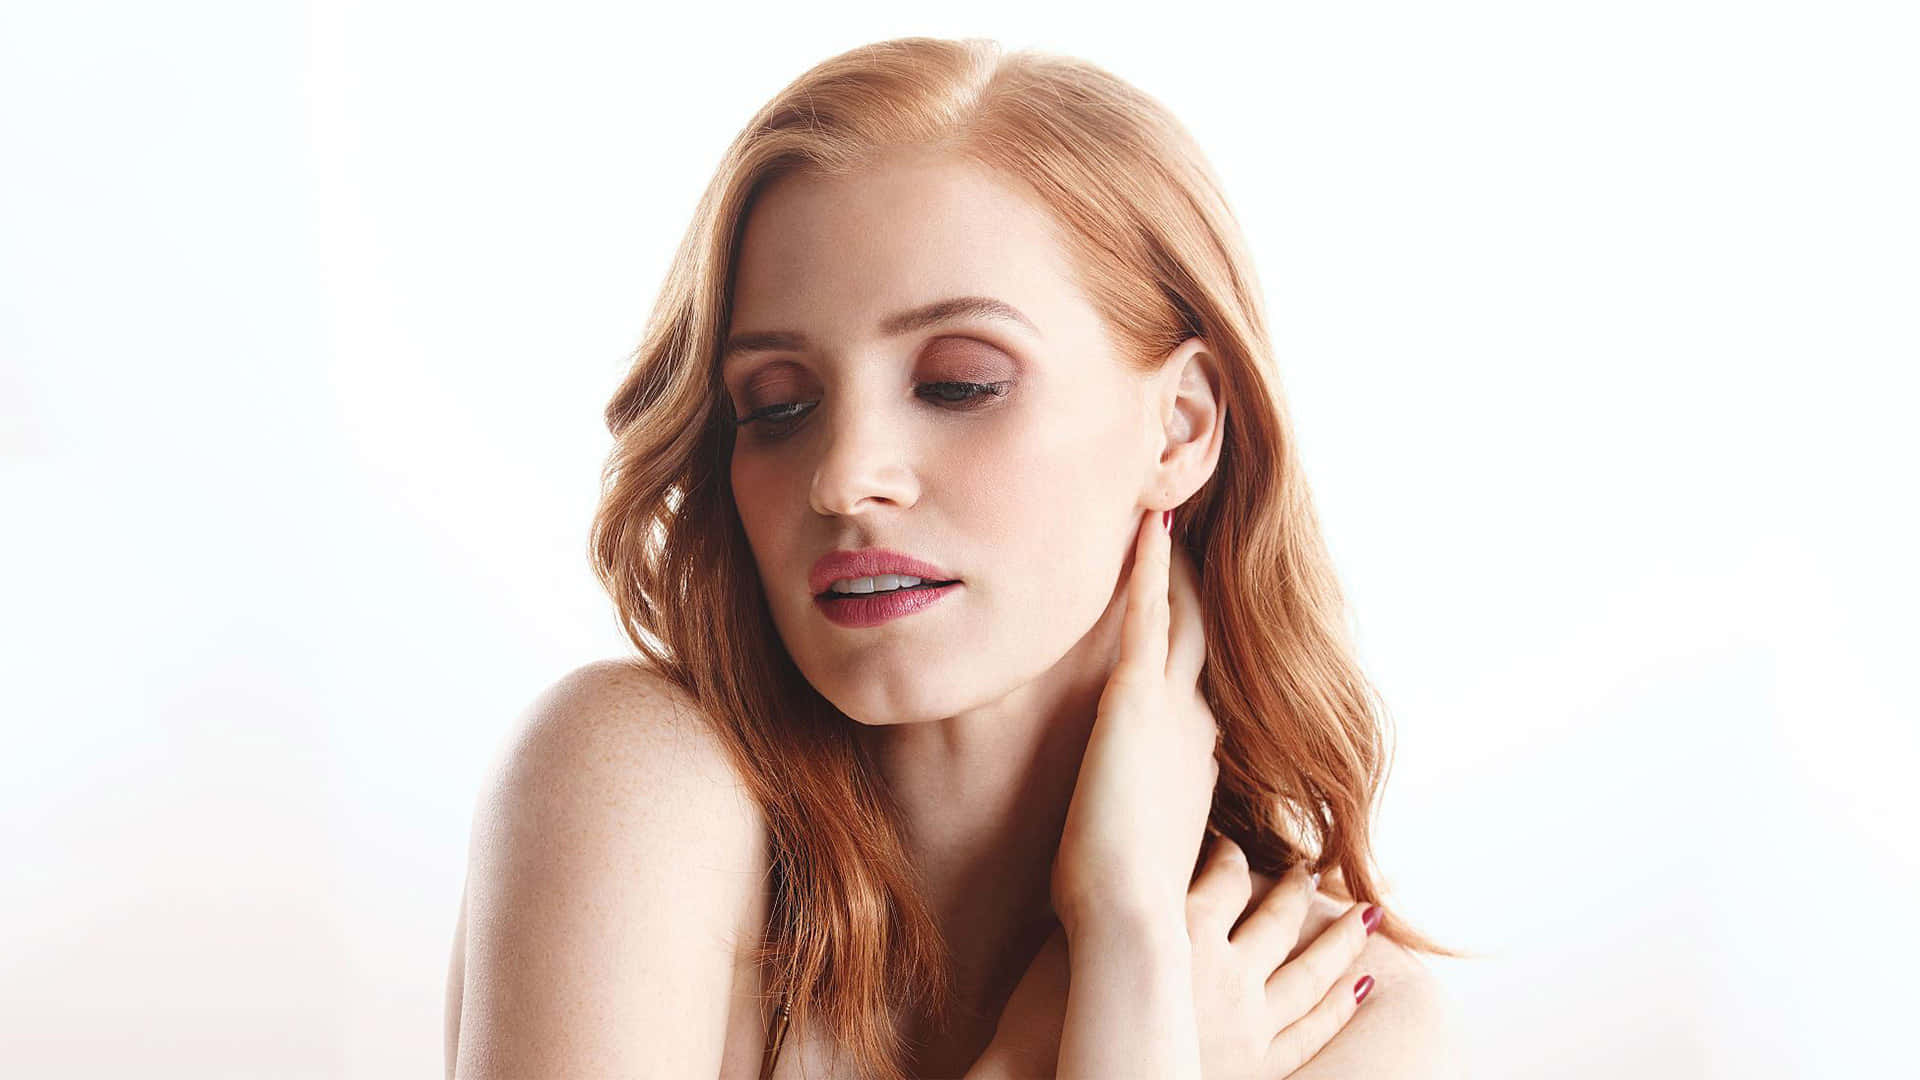 Actress Jessica Chastain in a Stunning Pose Wallpaper